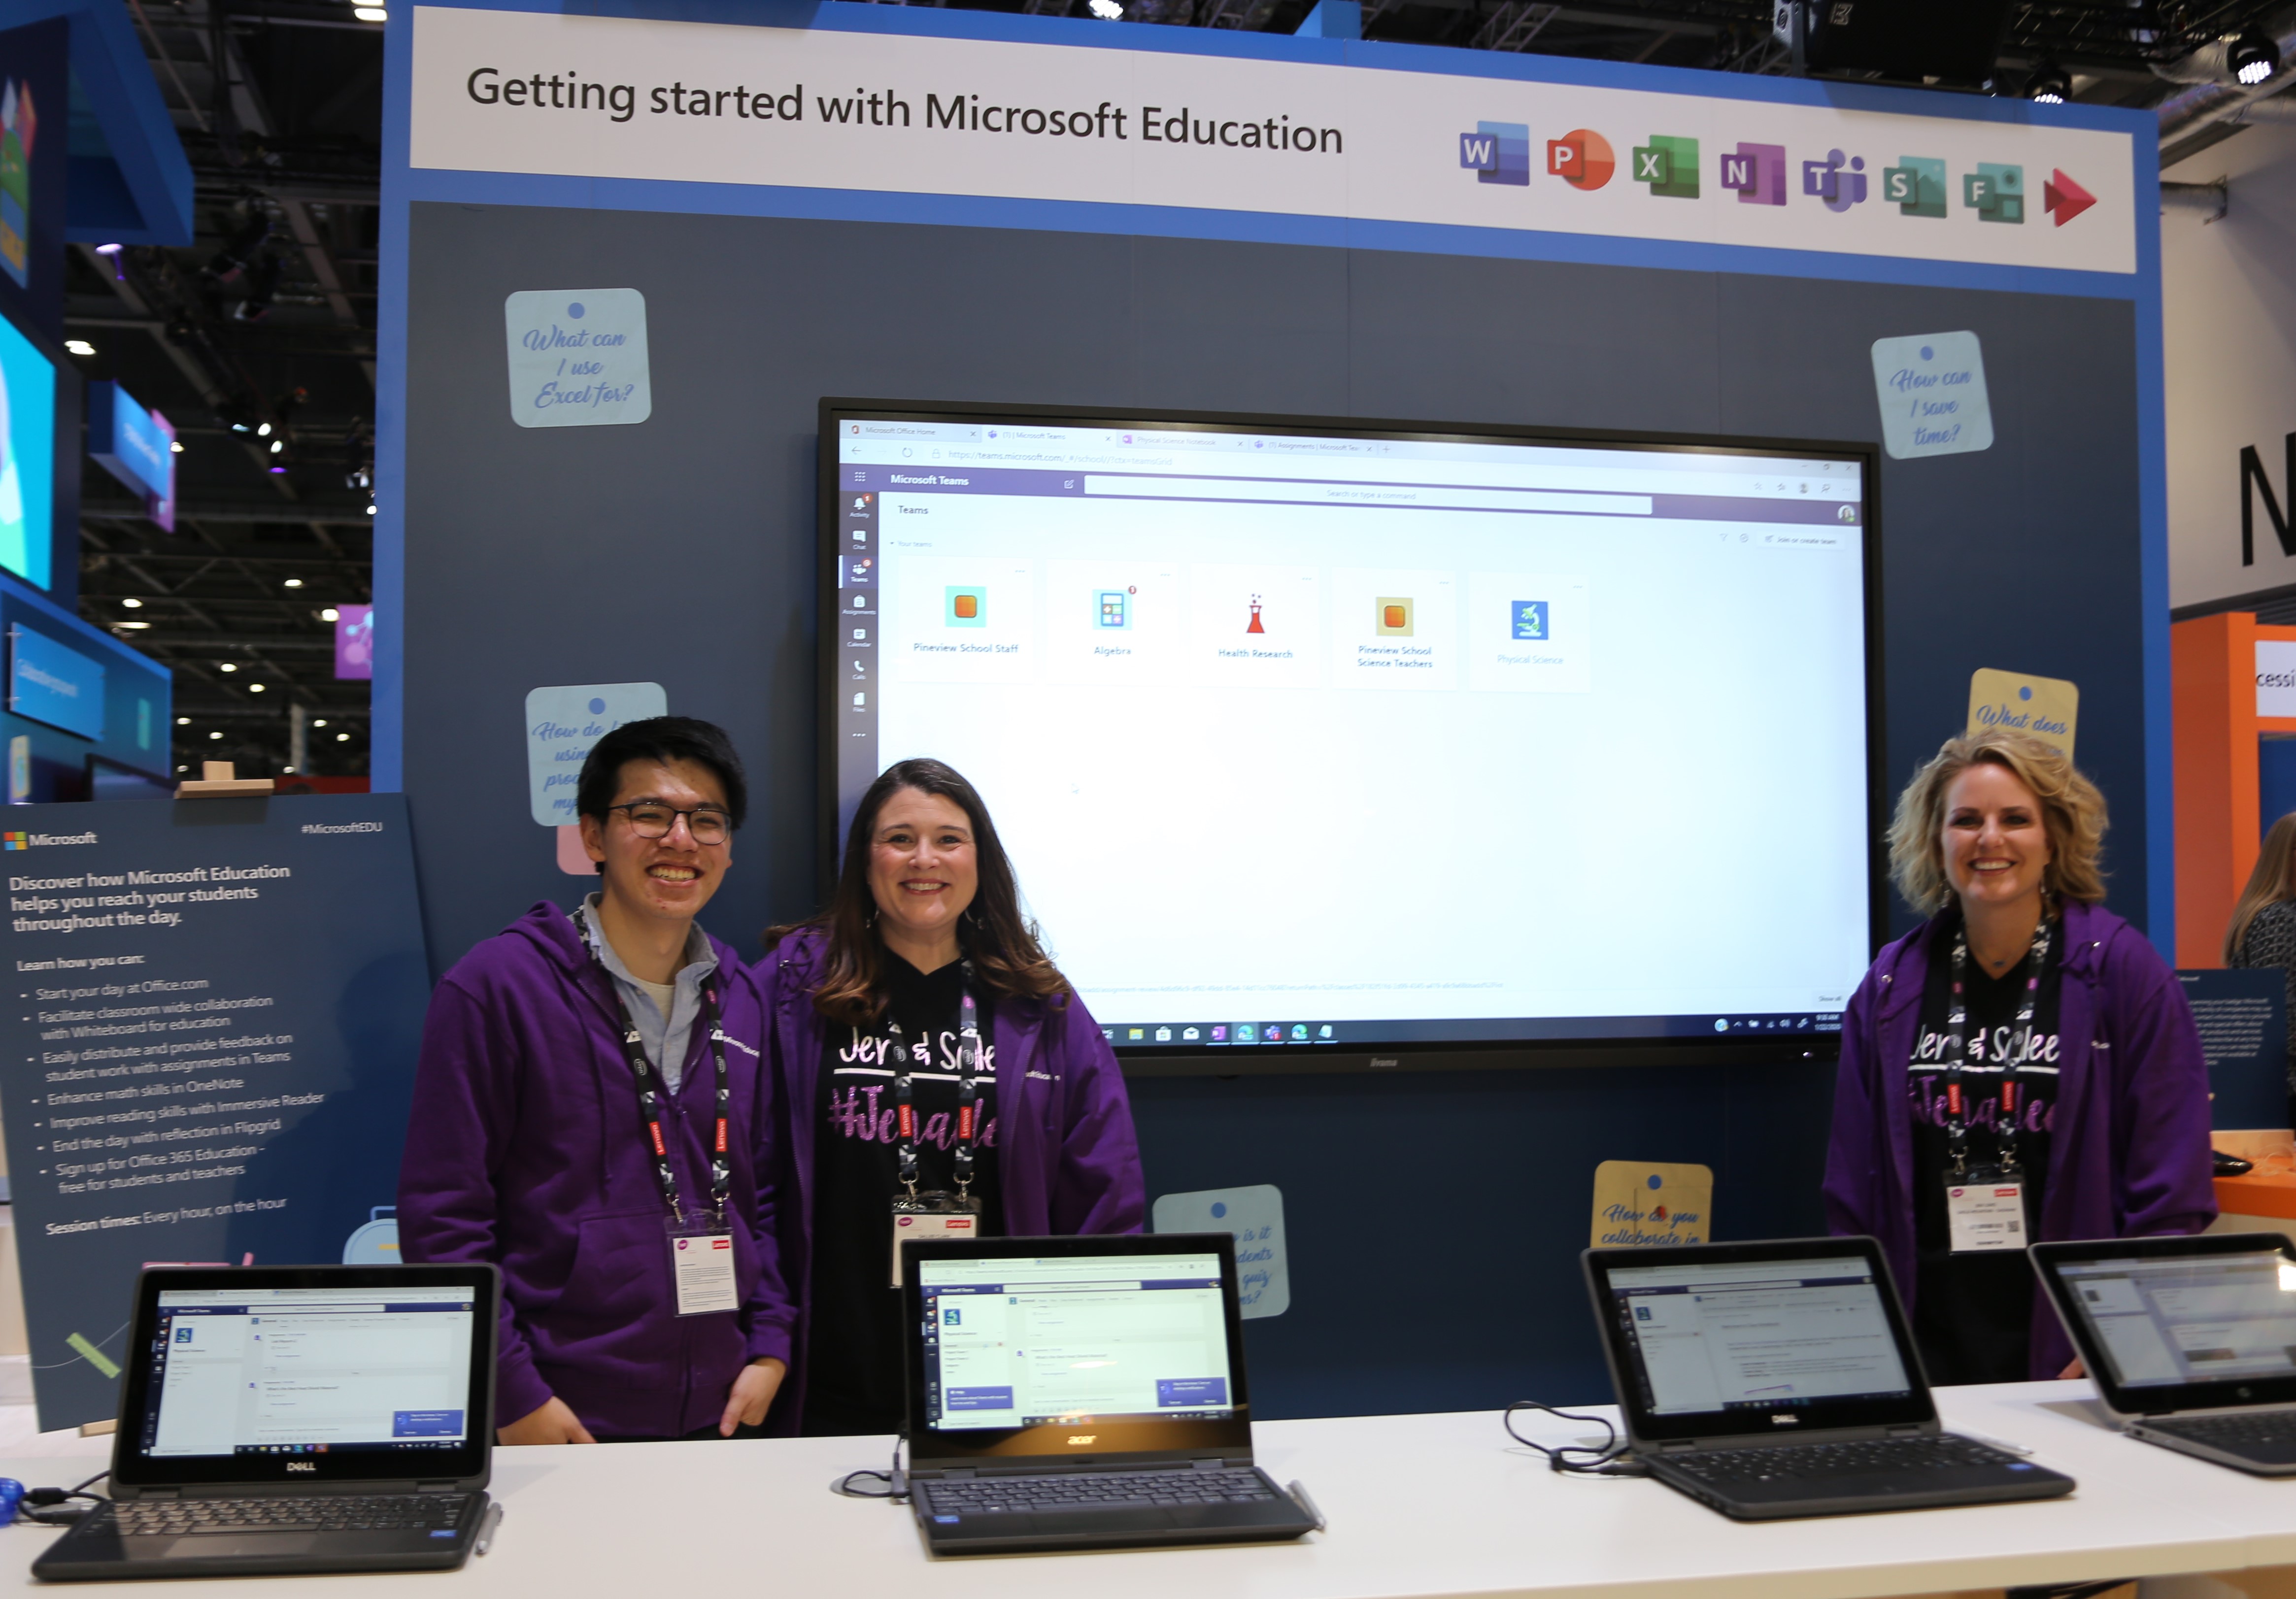 Microsoft staff were on hand to help people get started with some of our top tools